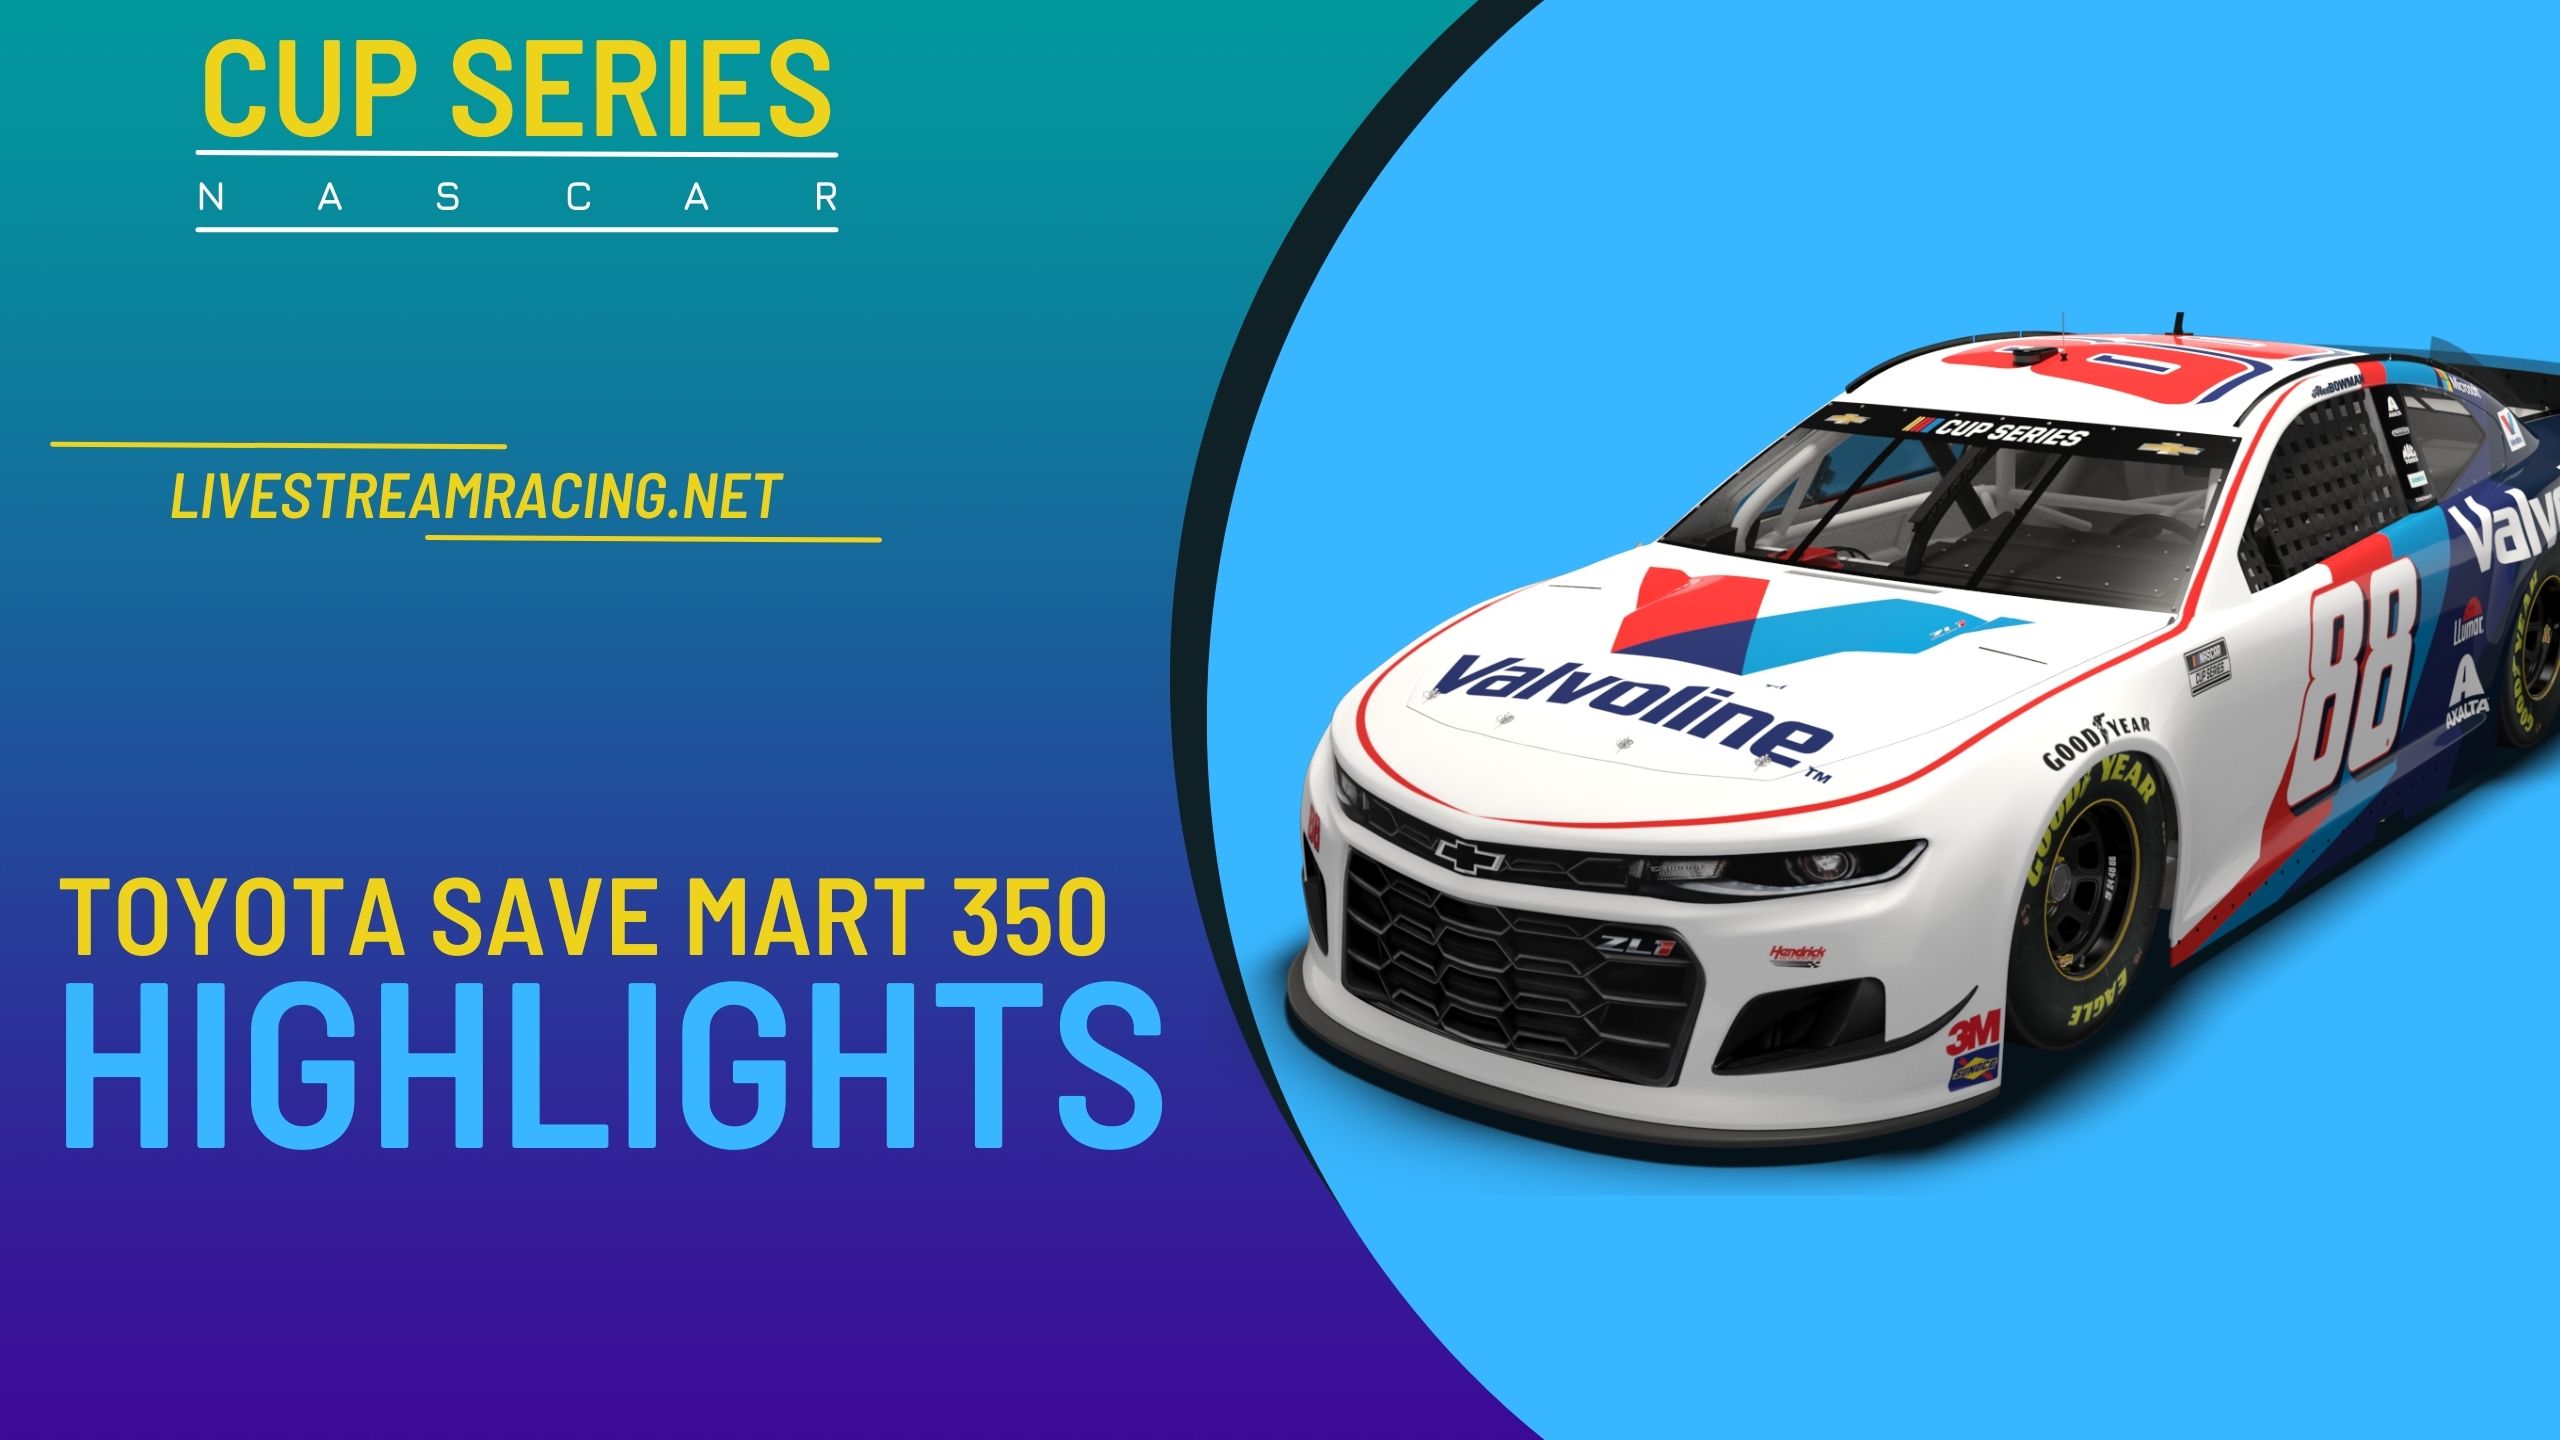 Toyota Save Mart 350 Nascar Highlights 2022 Cup Series